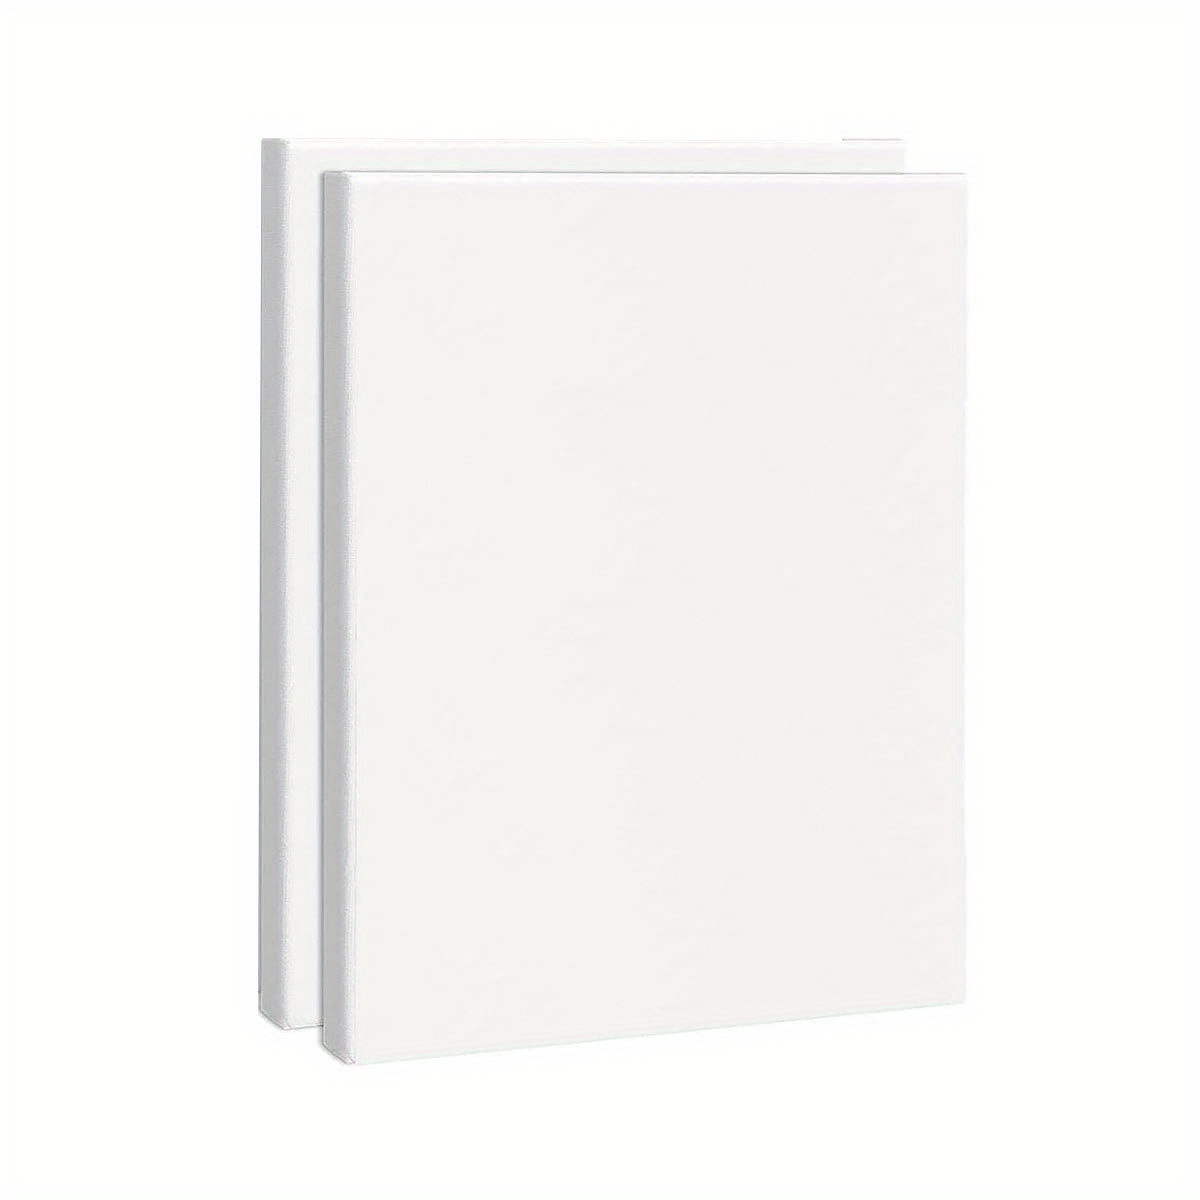 Paint Canvases For Painting,, Blank White Stretched Canvas Bulk